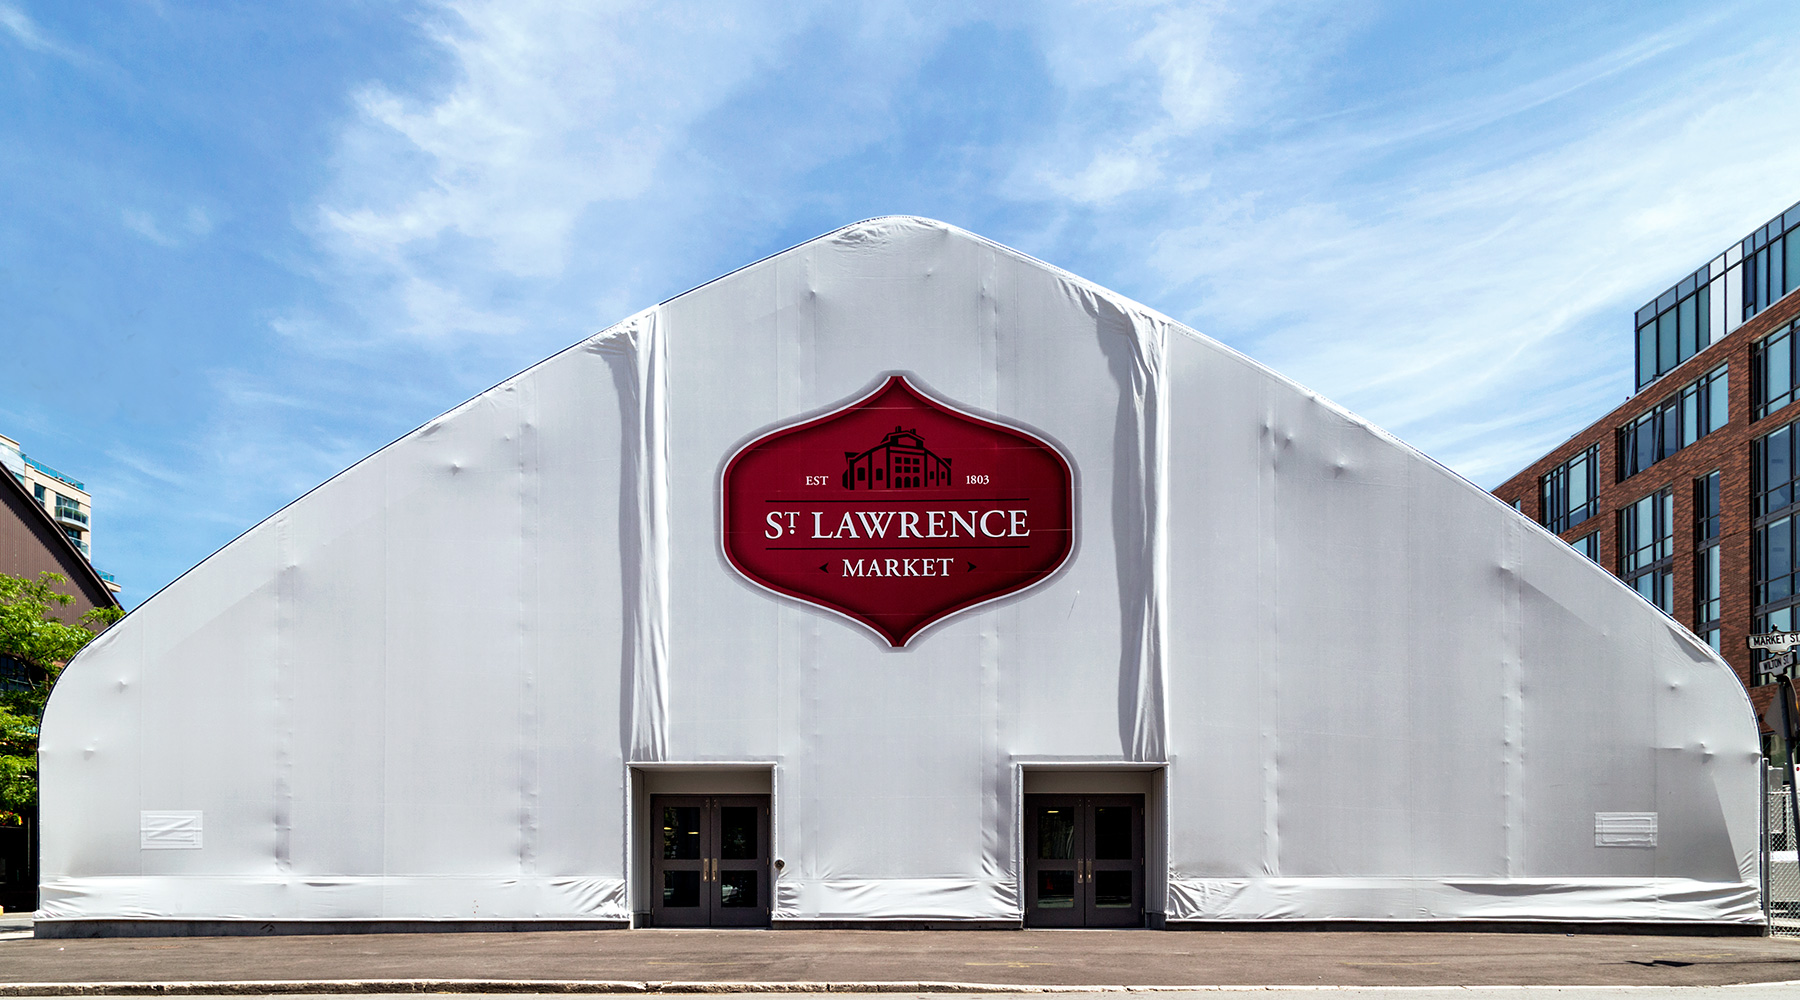 20150715. The new and temporary south North St. Lawrence Market.